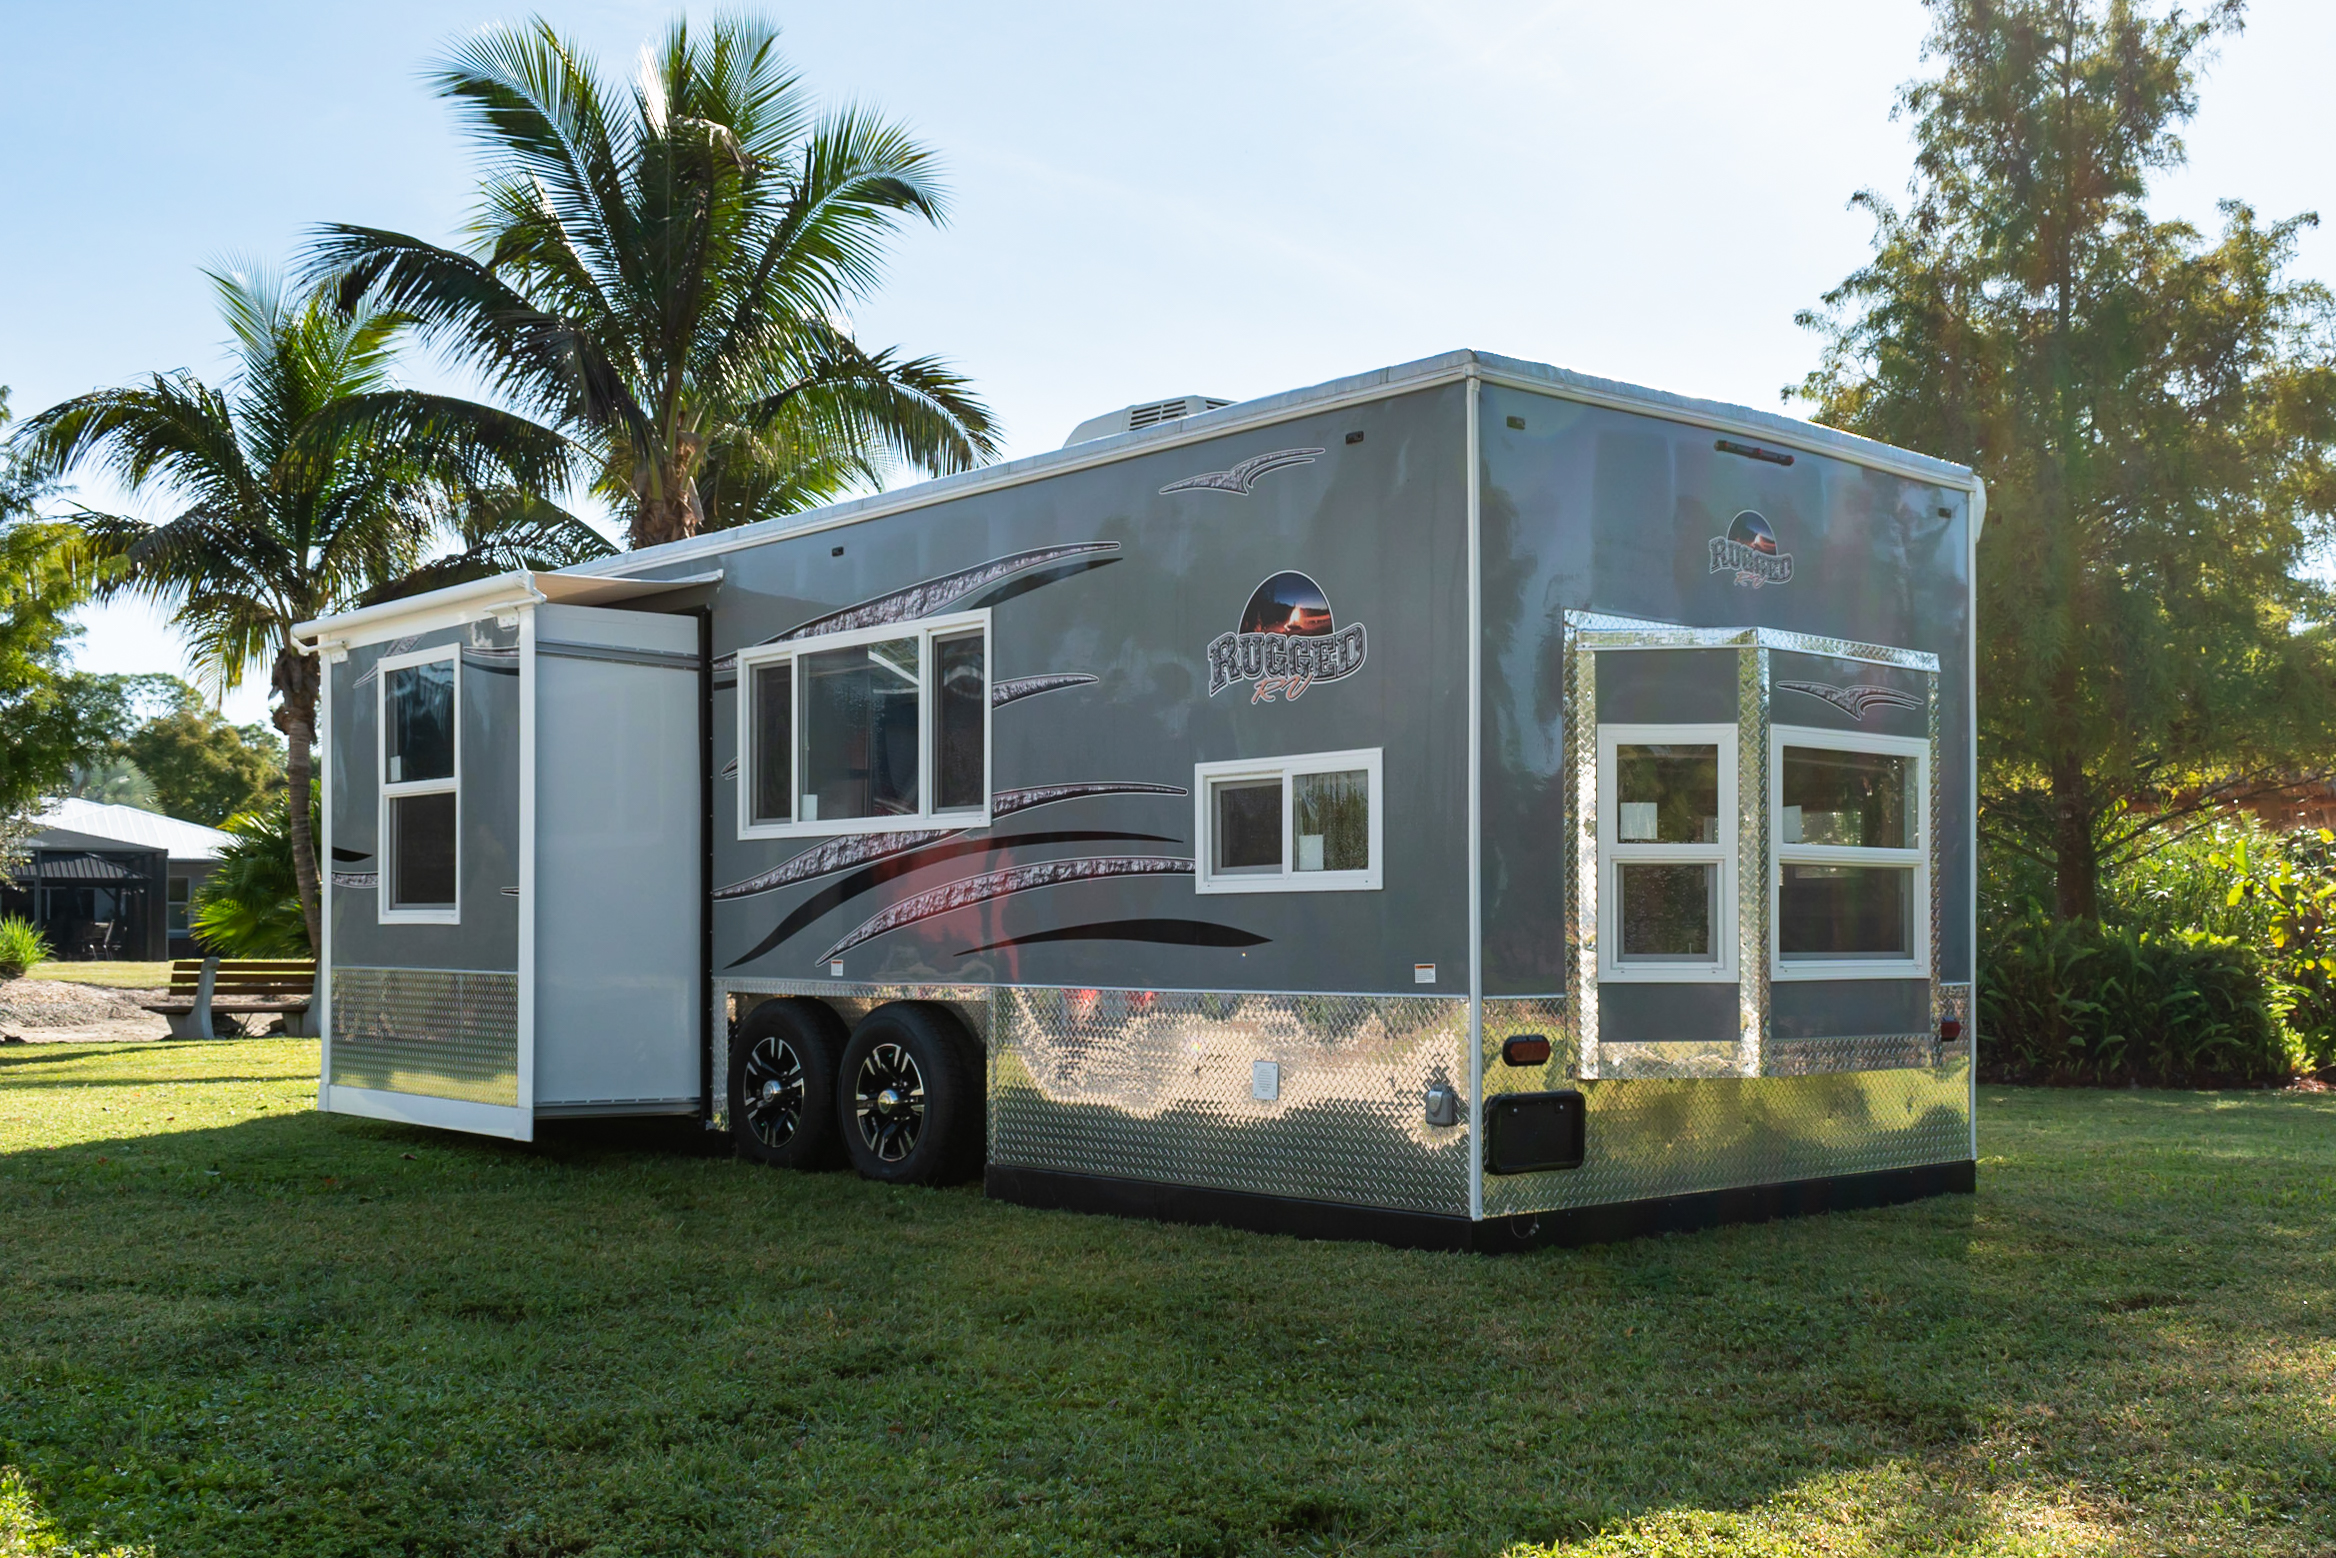 RV Pictures & Videos - Rugged RVs